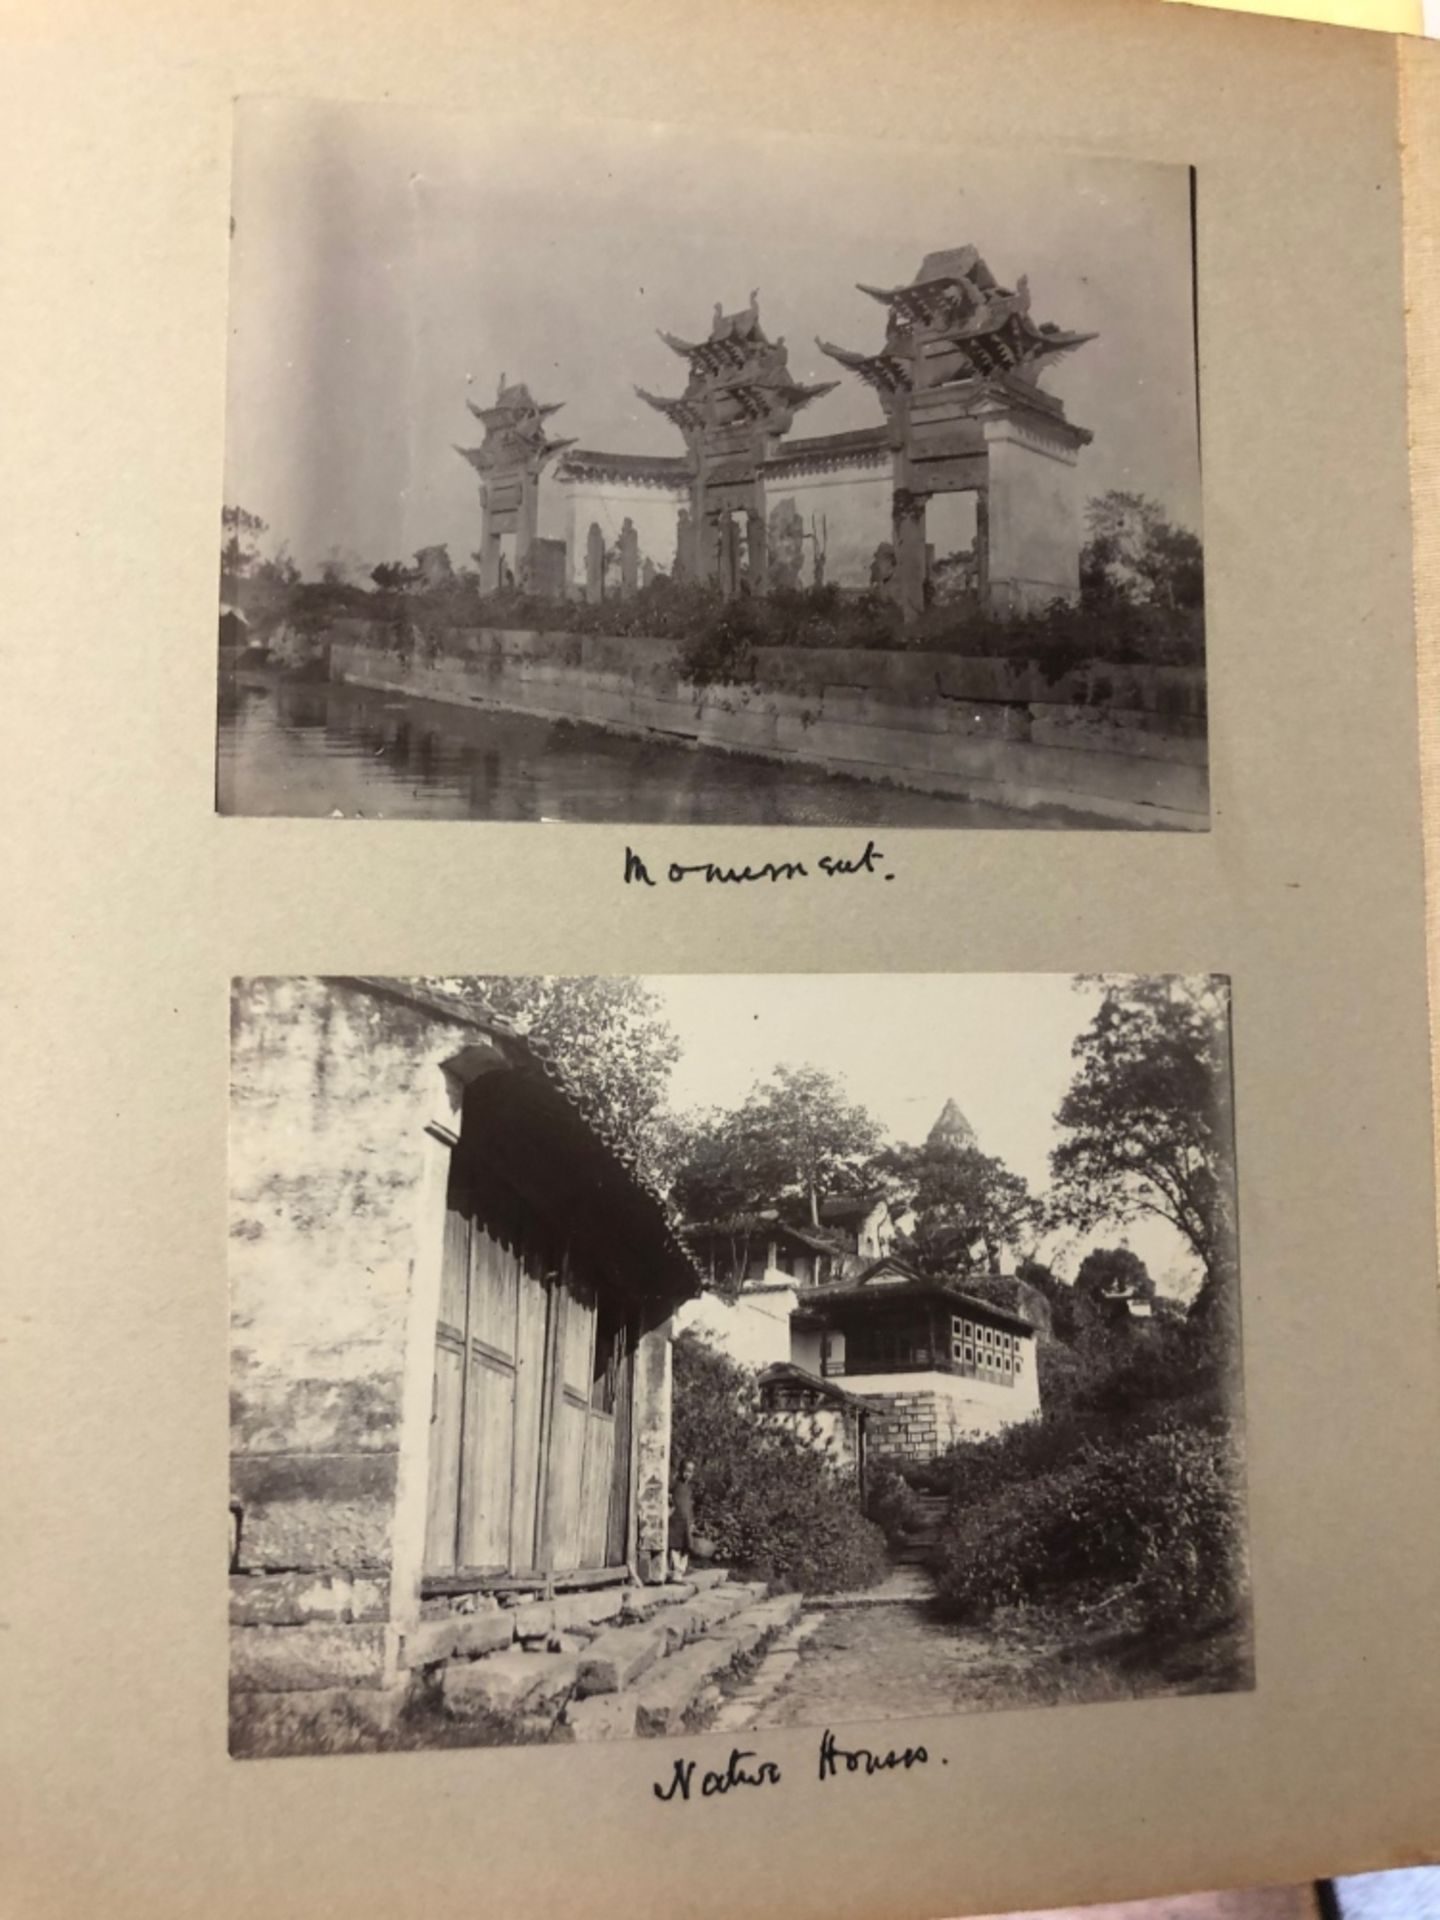 Shanghai: a green cloth photograph album circa 1918, of views in Shanghai including the river, - Image 21 of 43